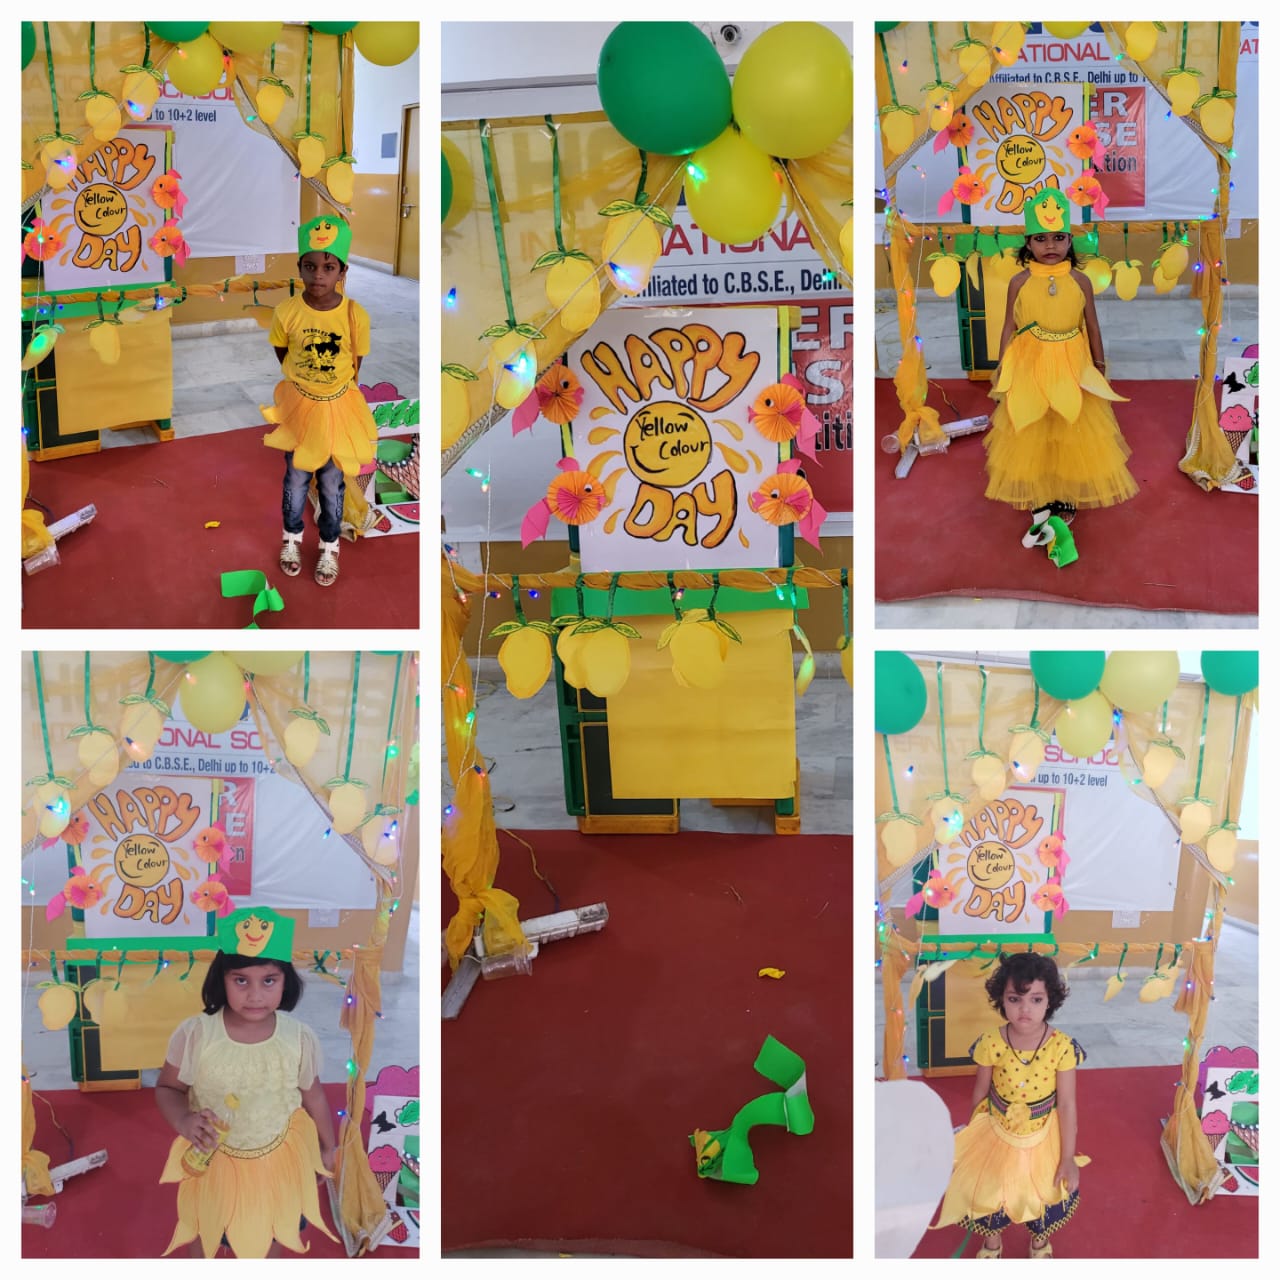 Yellow Color Day celebration